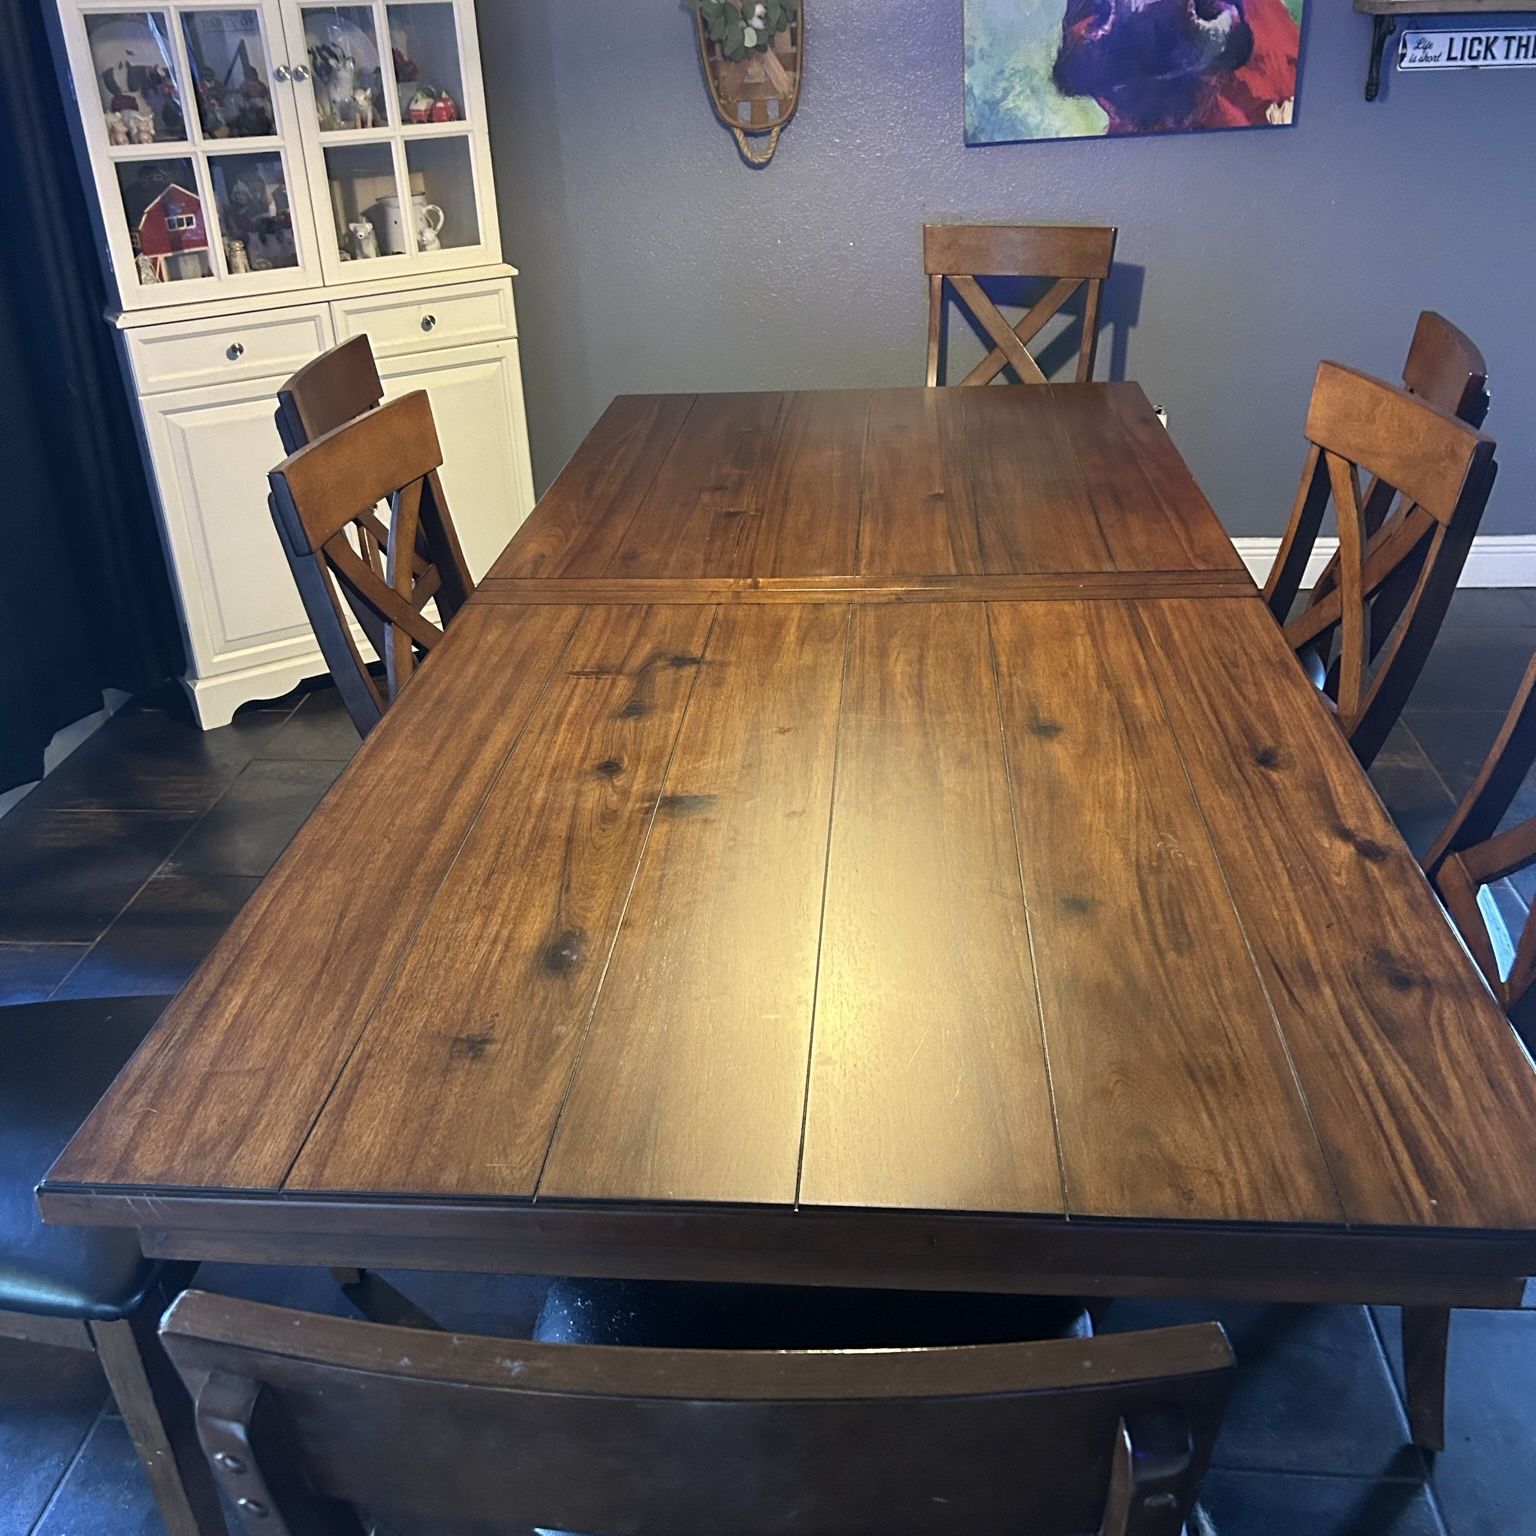 Heavy Wooden Dining Room Table And Chairs